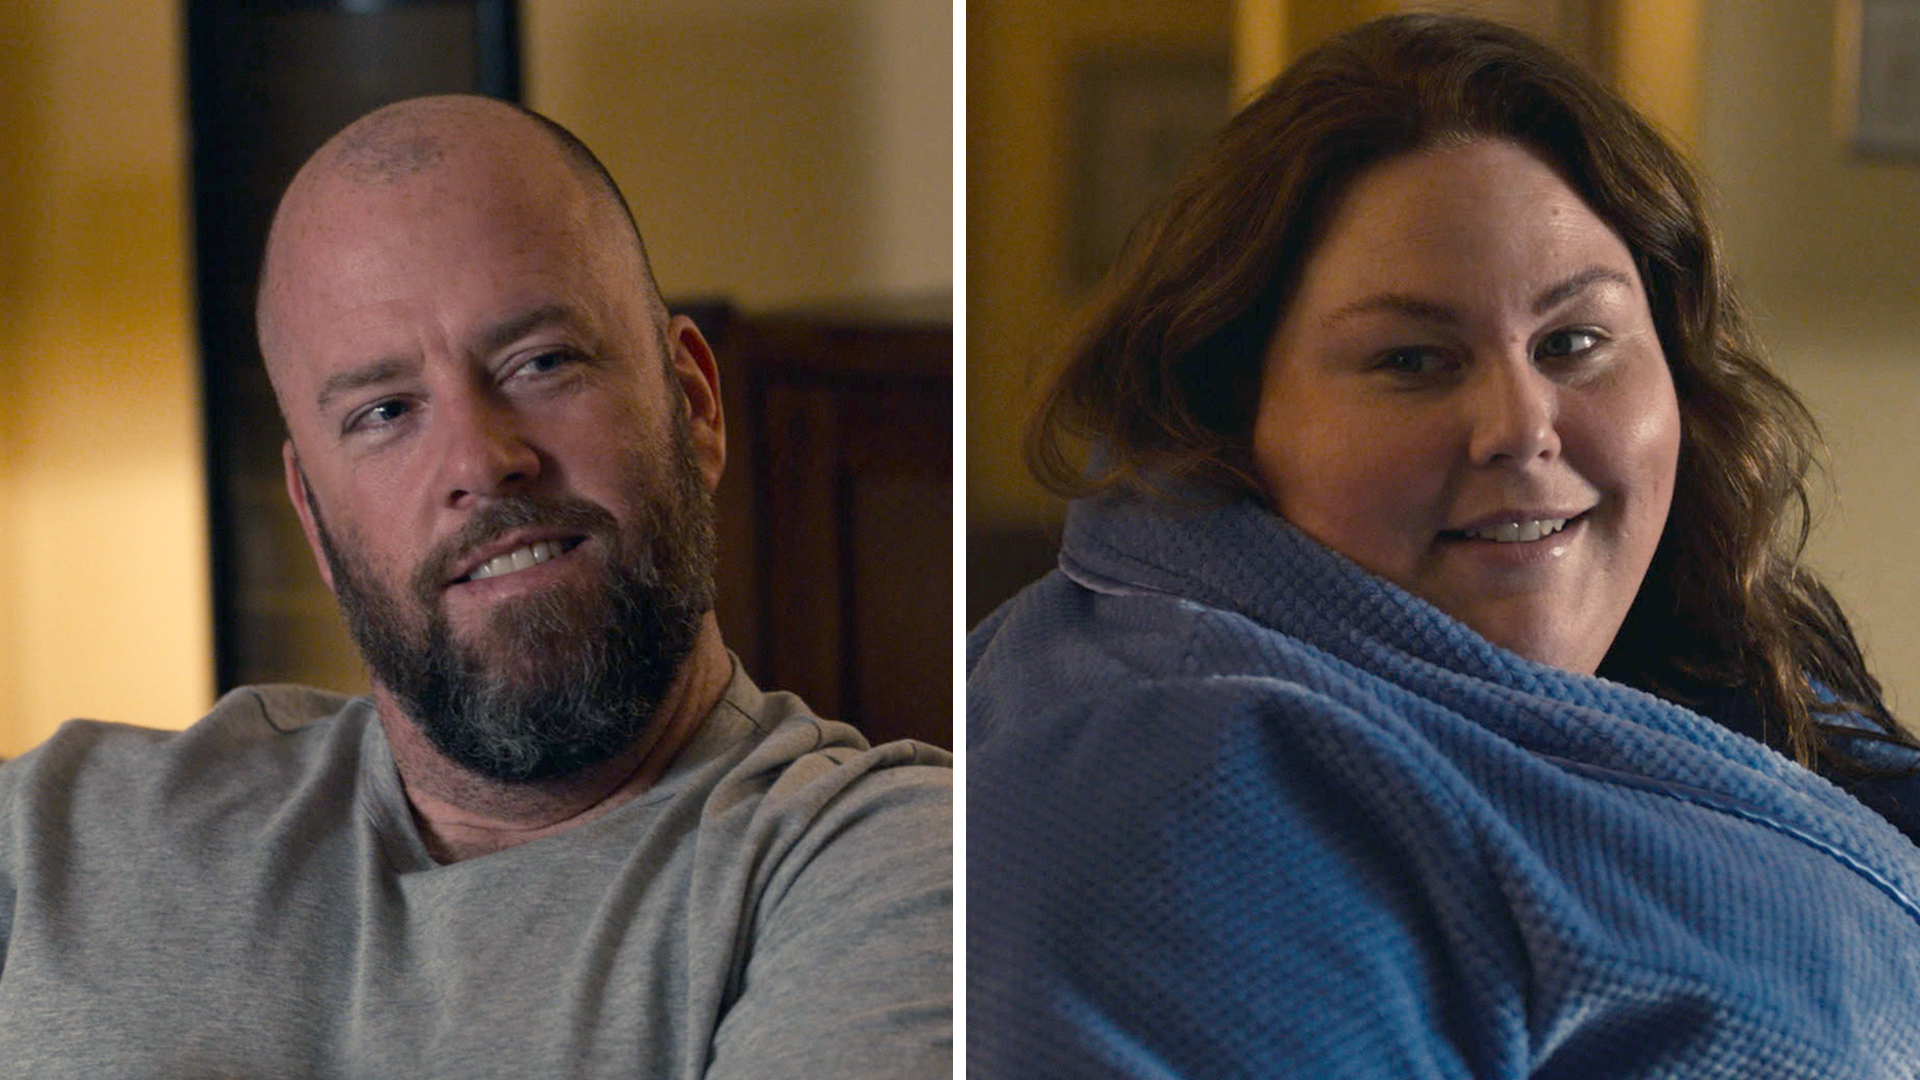 Screenshots of Chris Sullivan as Toby and Chrissy Metz as Kate in ‘This Is Us’ Season 5 Episode 14